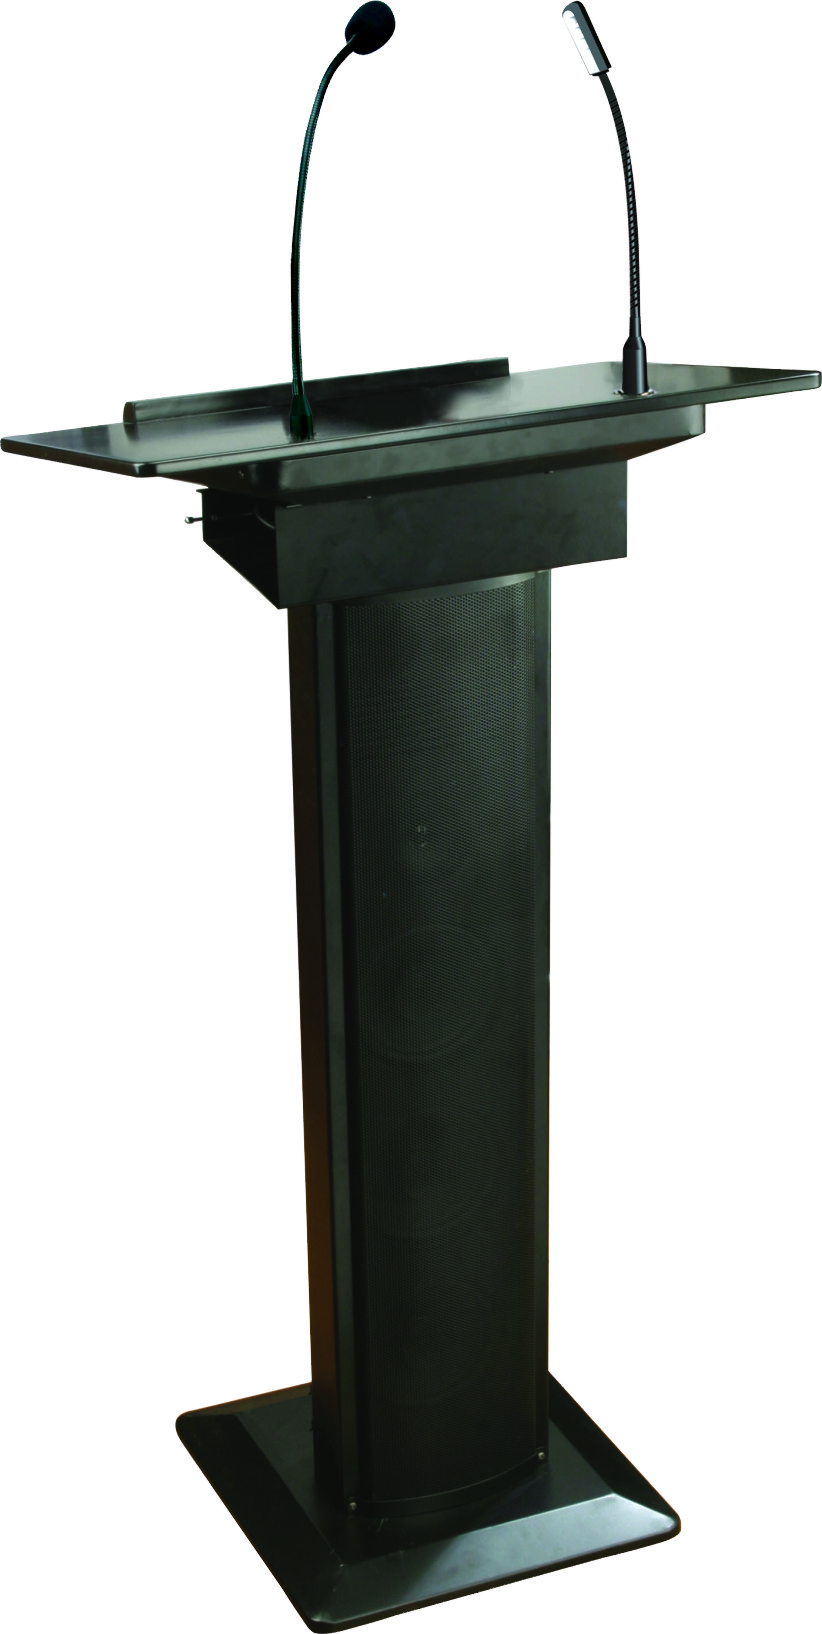 ITC T-6236 T-6236A T-6236B T-6236U Lectern/Lectern with VHF Wireless MIC + 1 Dynamic MIC/Lectern with VHF Wireless MIC/Lectern with UHF Wireless MIC